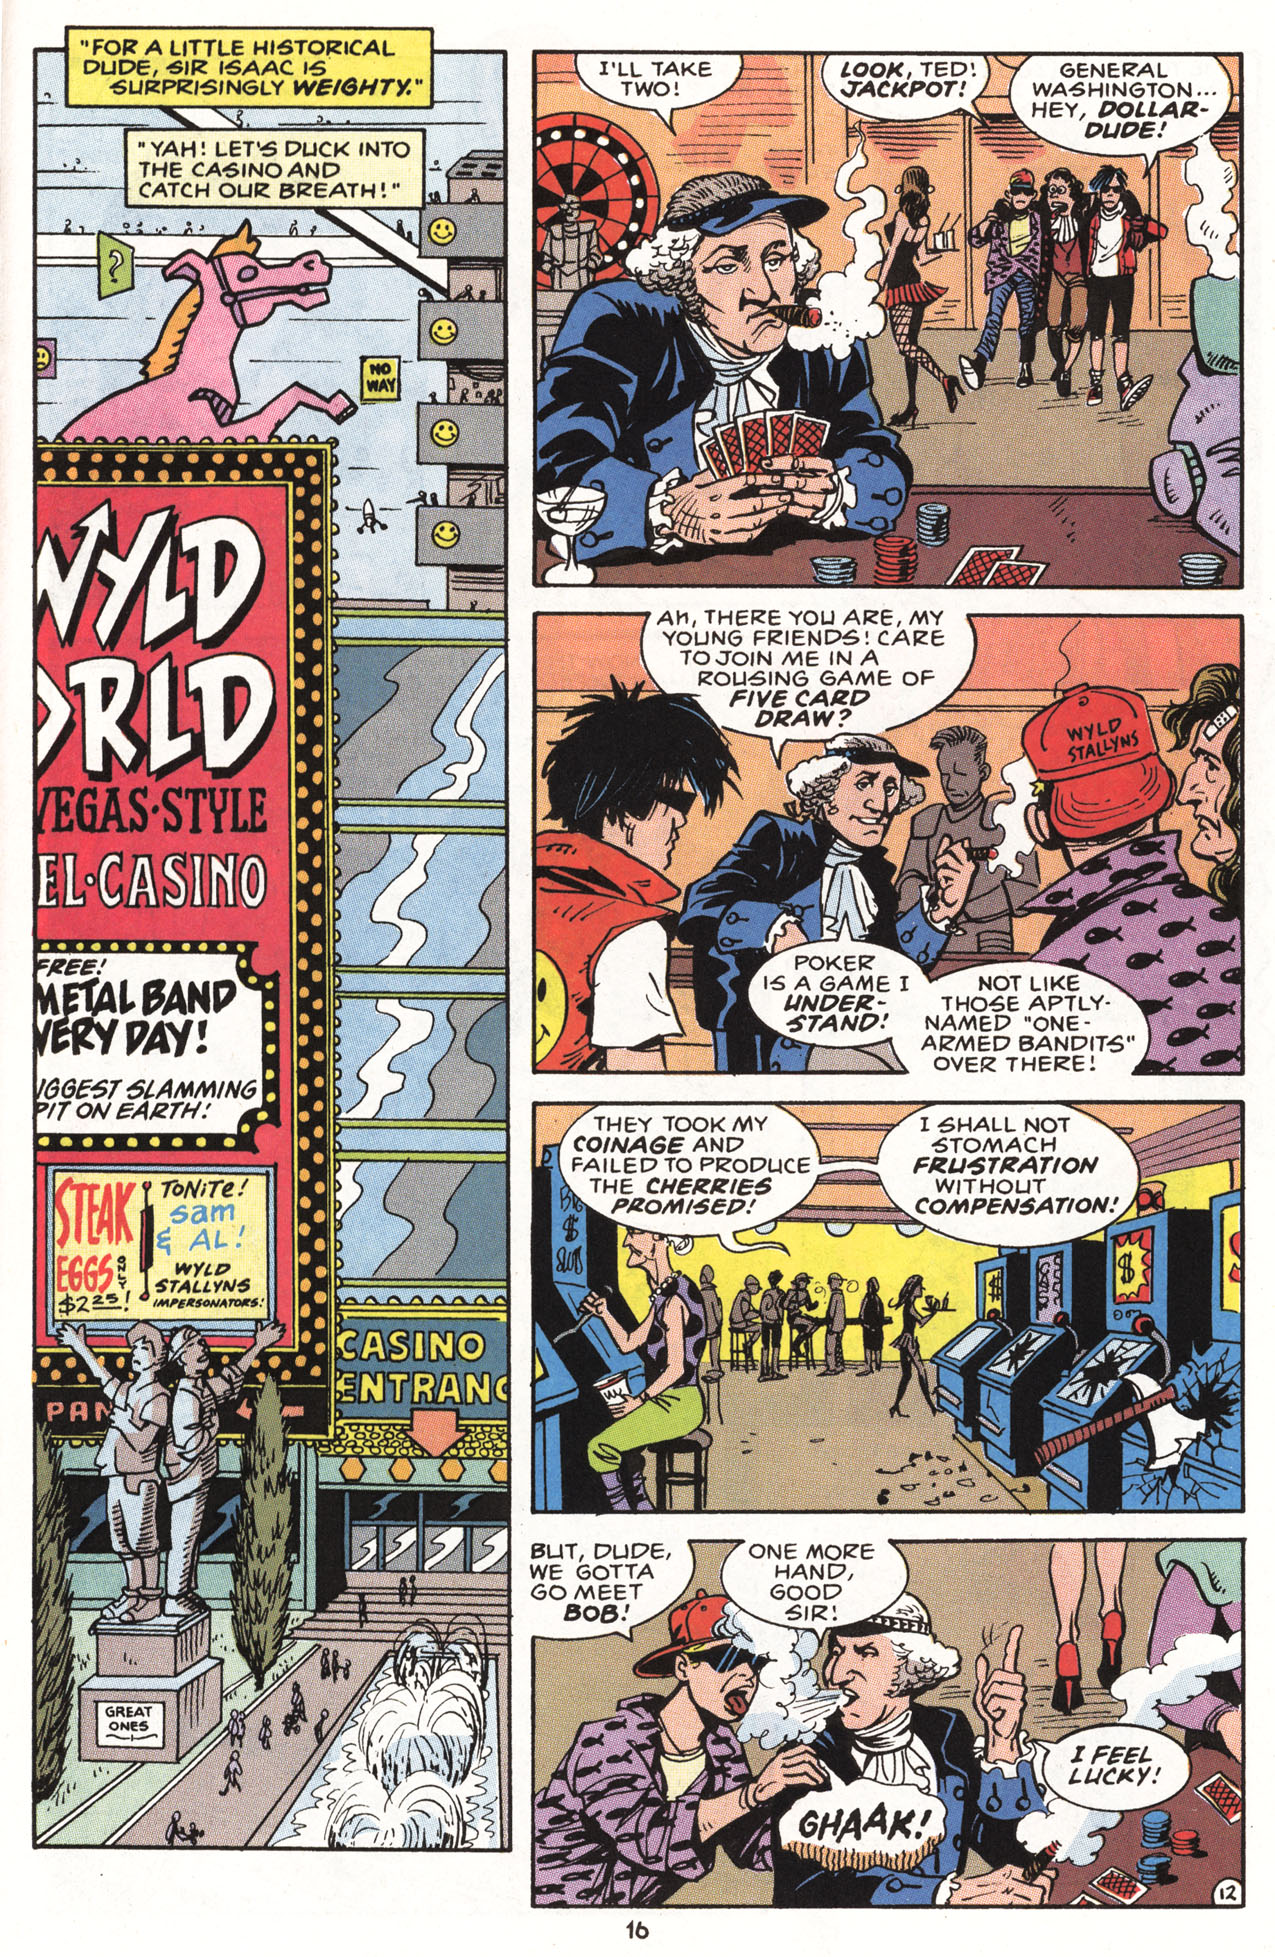 Read online Bill & Ted's Excellent Comic Book comic -  Issue #8 - 18